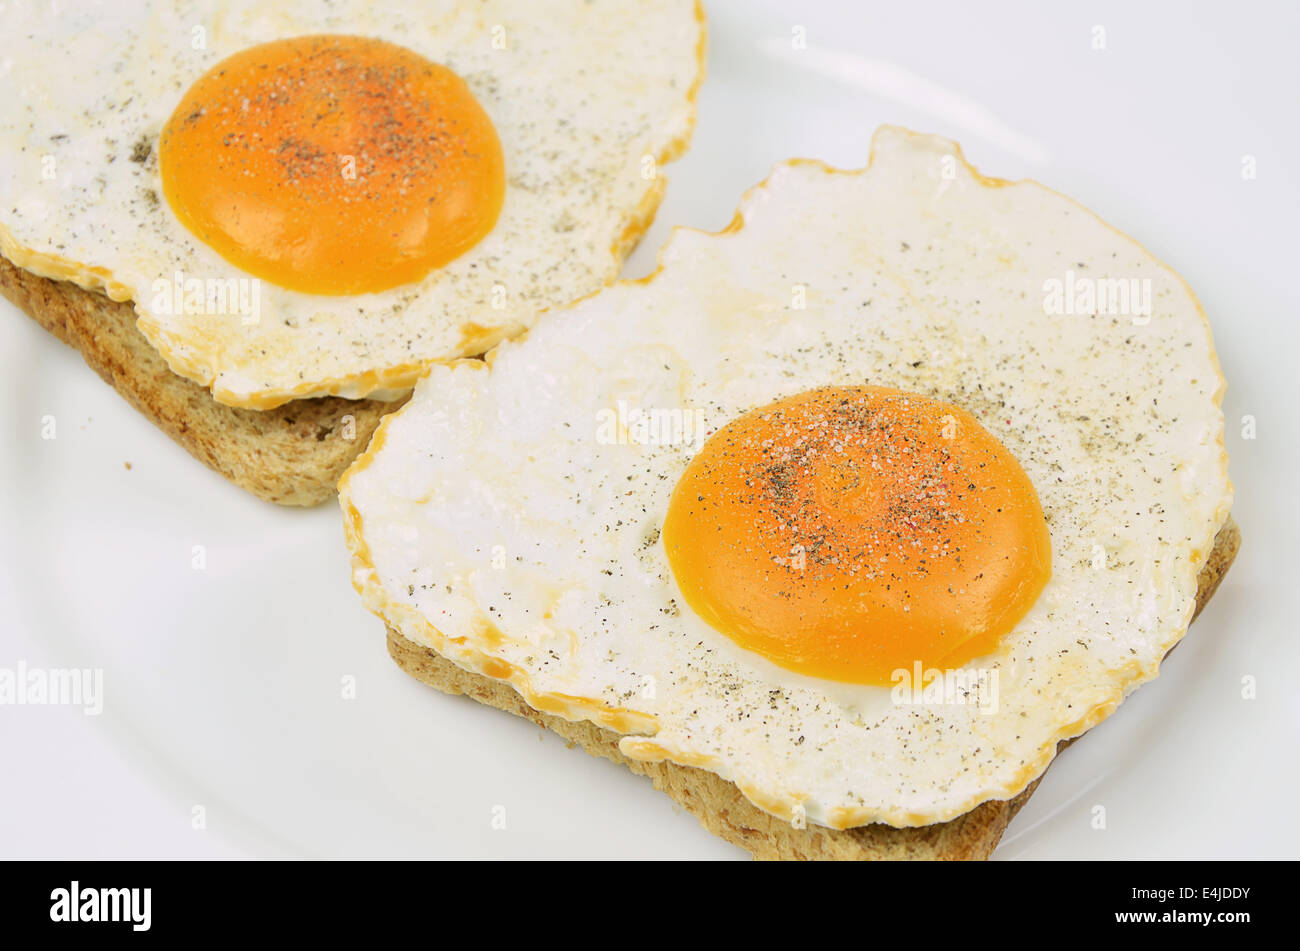 two fried eggs with salt and pepper on toast, close up on white plate, full frame Stock Photo